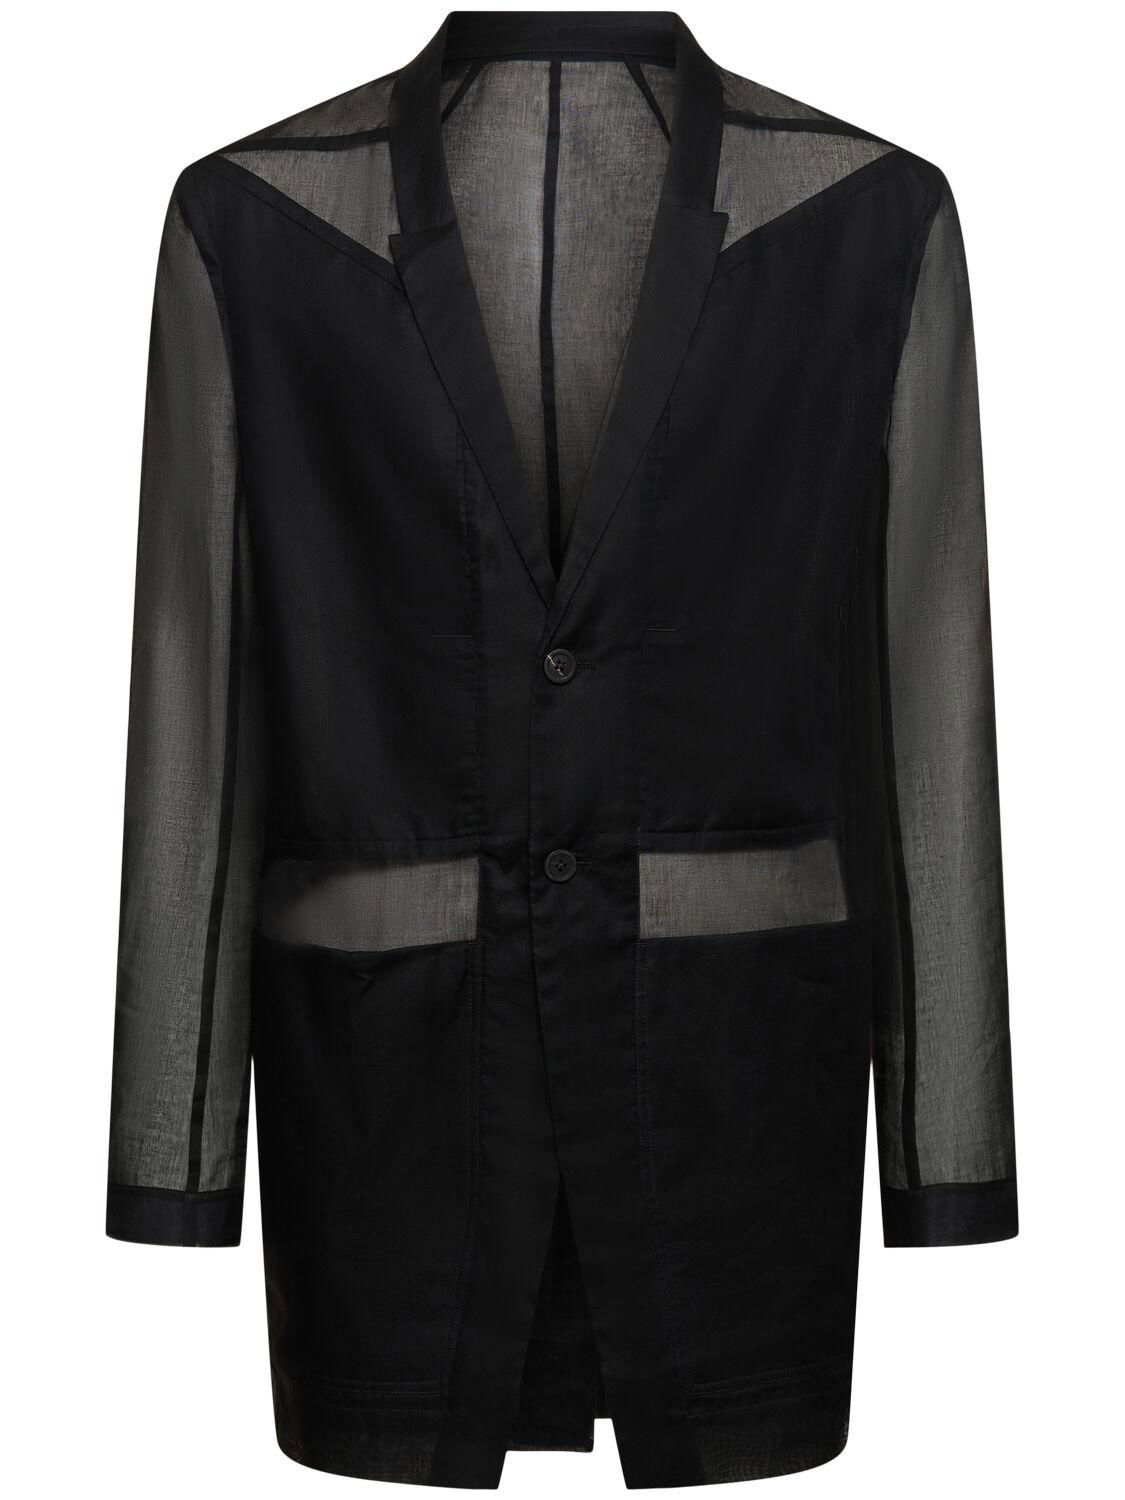 Lido Single Breasted Cotton Blazer by RICK OWENS